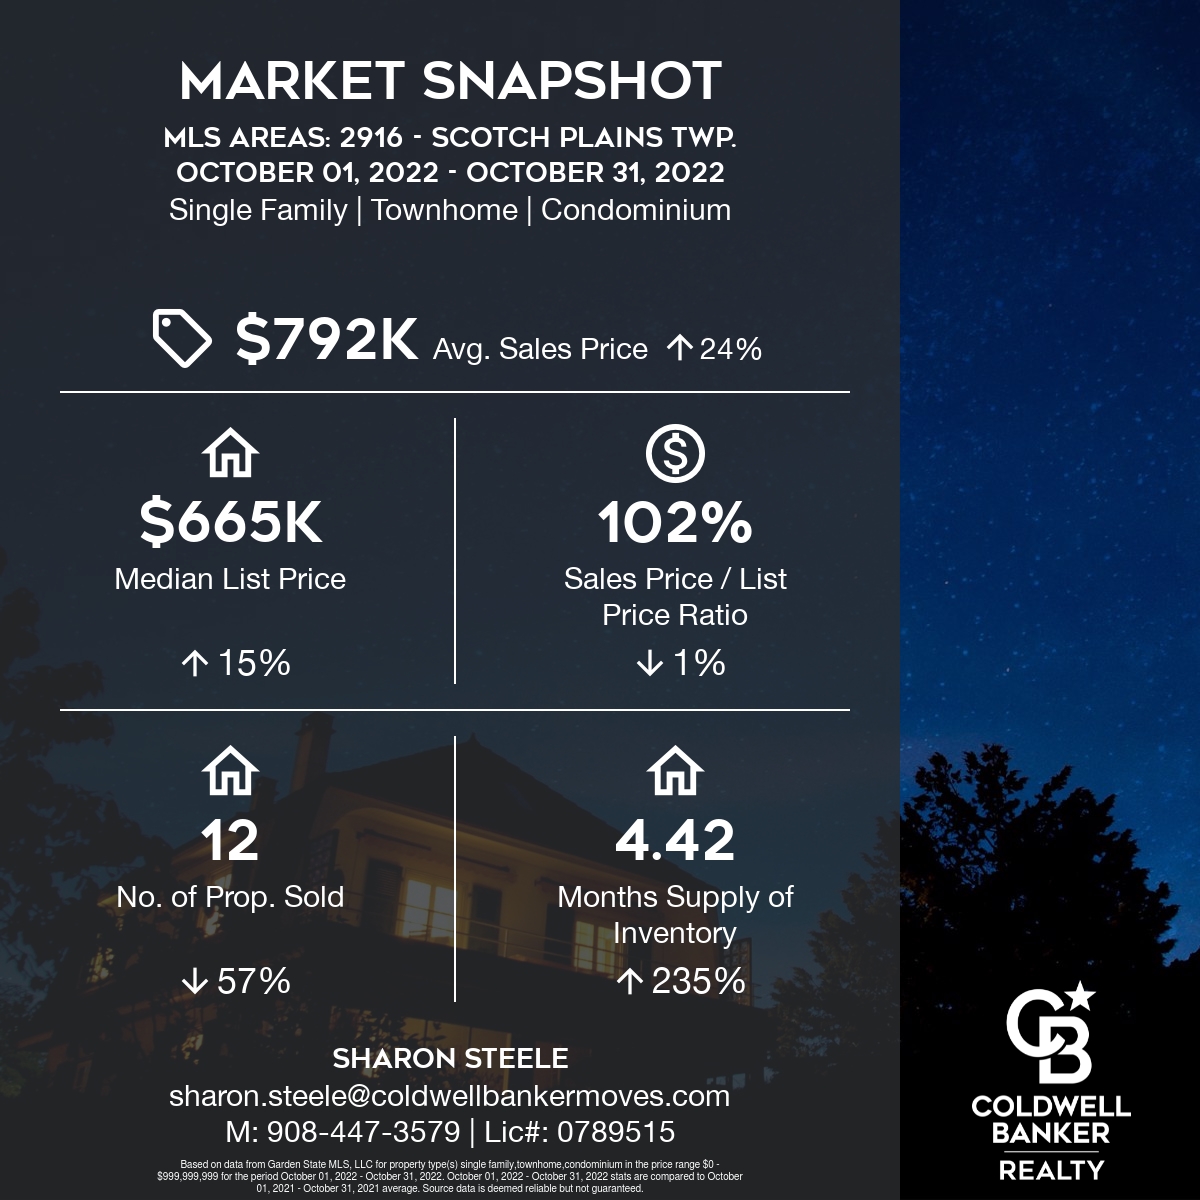 real estate market, Curious About Local Real Estate Market Trends in the Cranford Westfield Area of NJ?